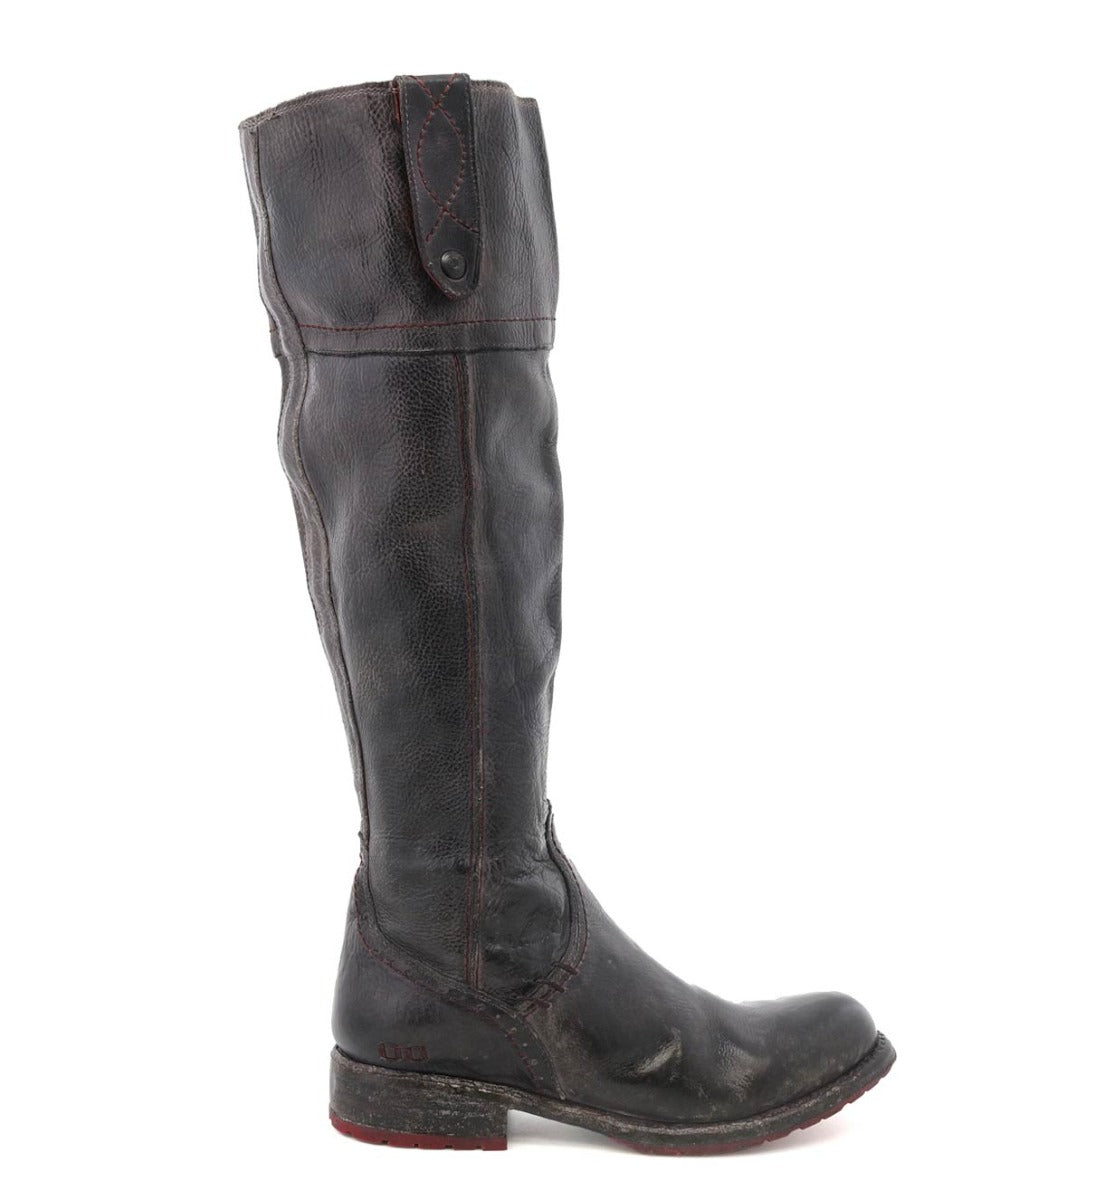 A women's brown leather Jacqueline boot with a zipper on the side from Bed Stu.